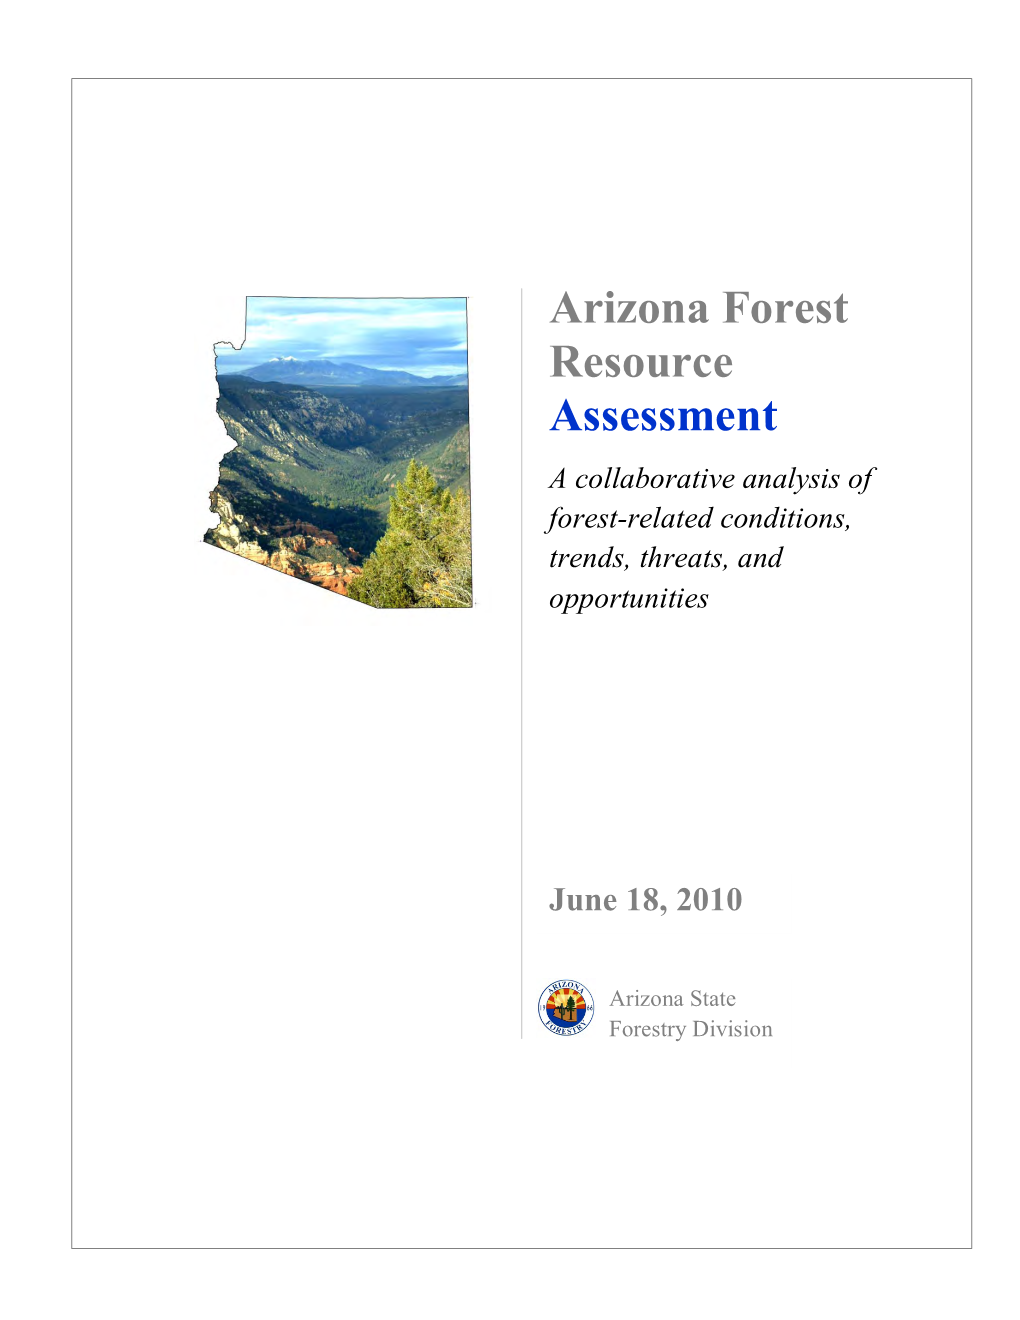 Arizona Forest Resource Assessment a Collaborative Analysis of Forest-Related Conditions, Trends, Threats, and Opportunities